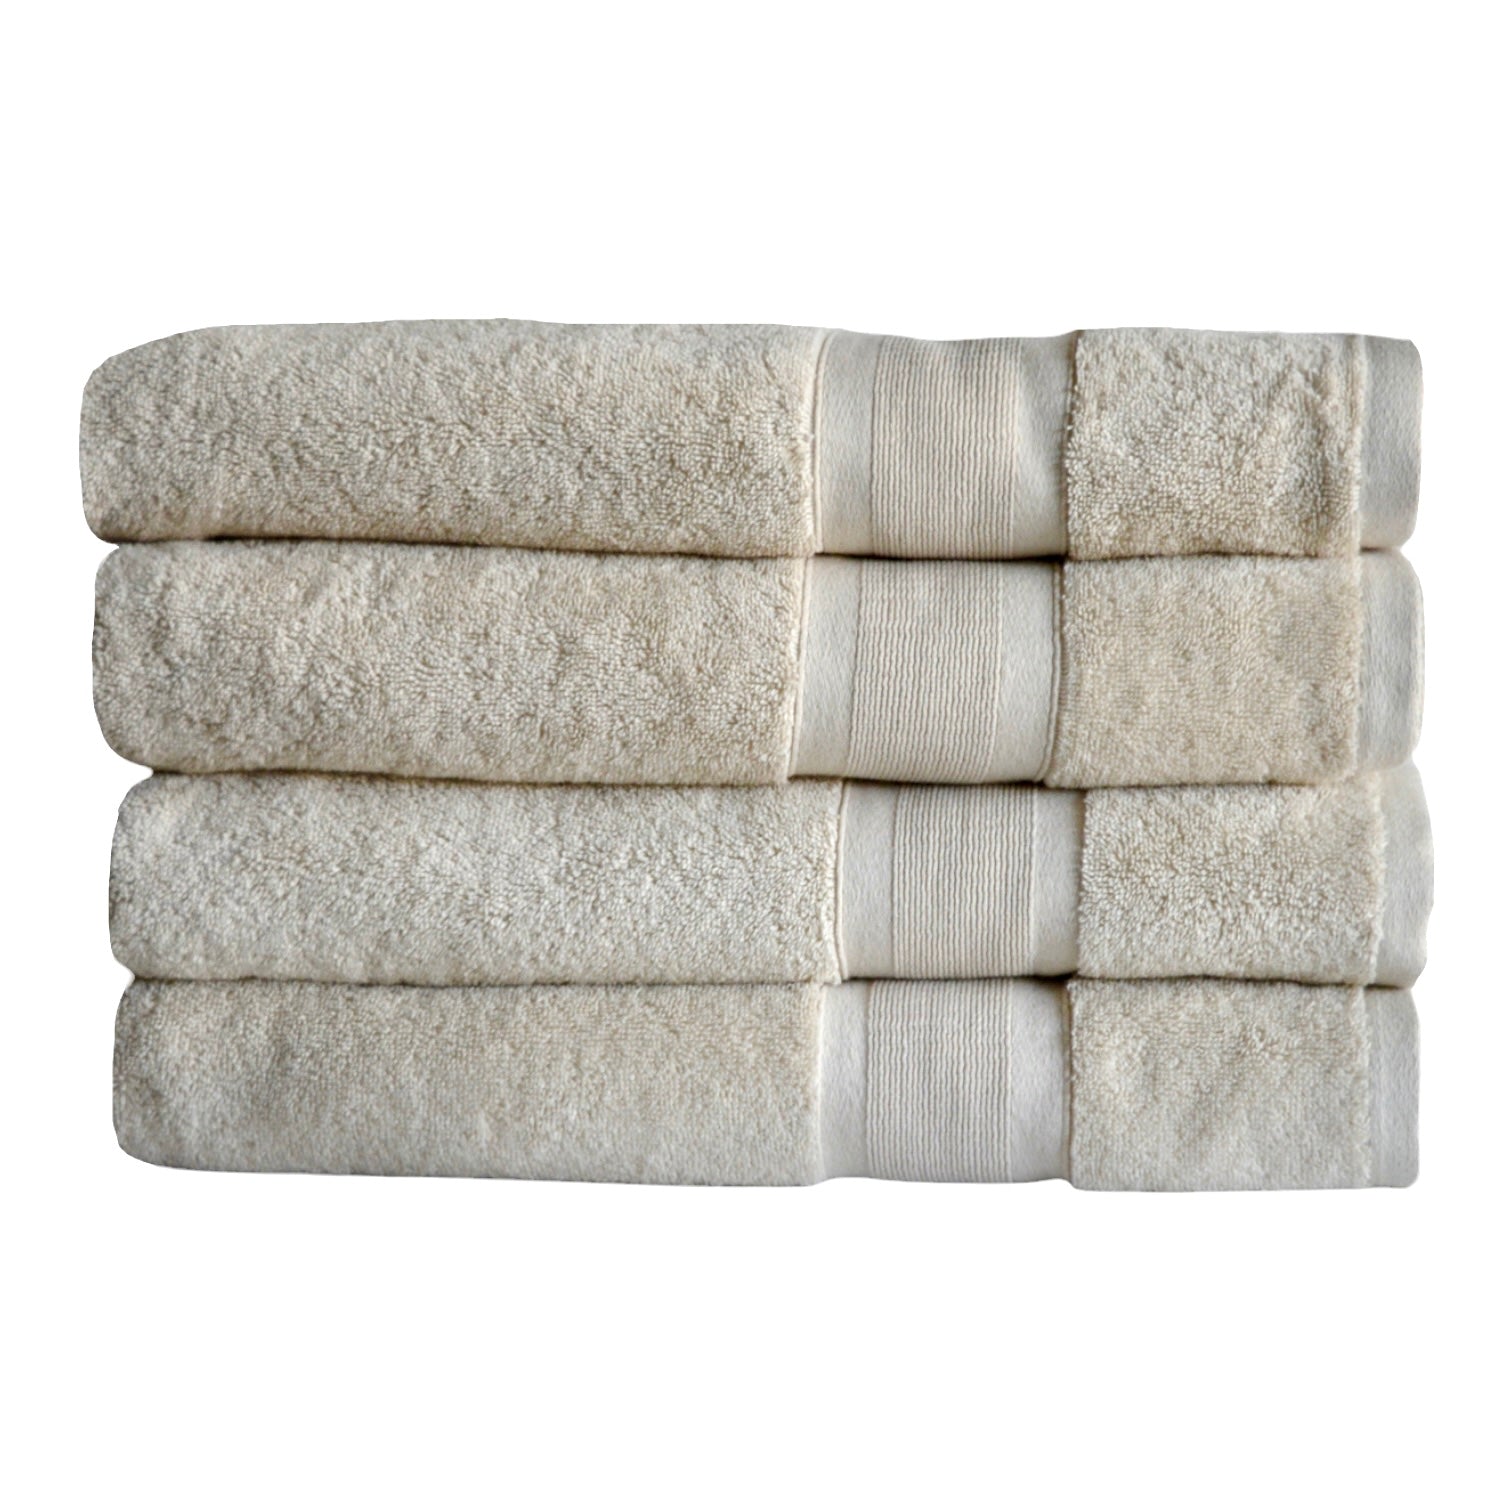 Combed Turkish Cotton Towel Set in Ivory color – Moon Mountain